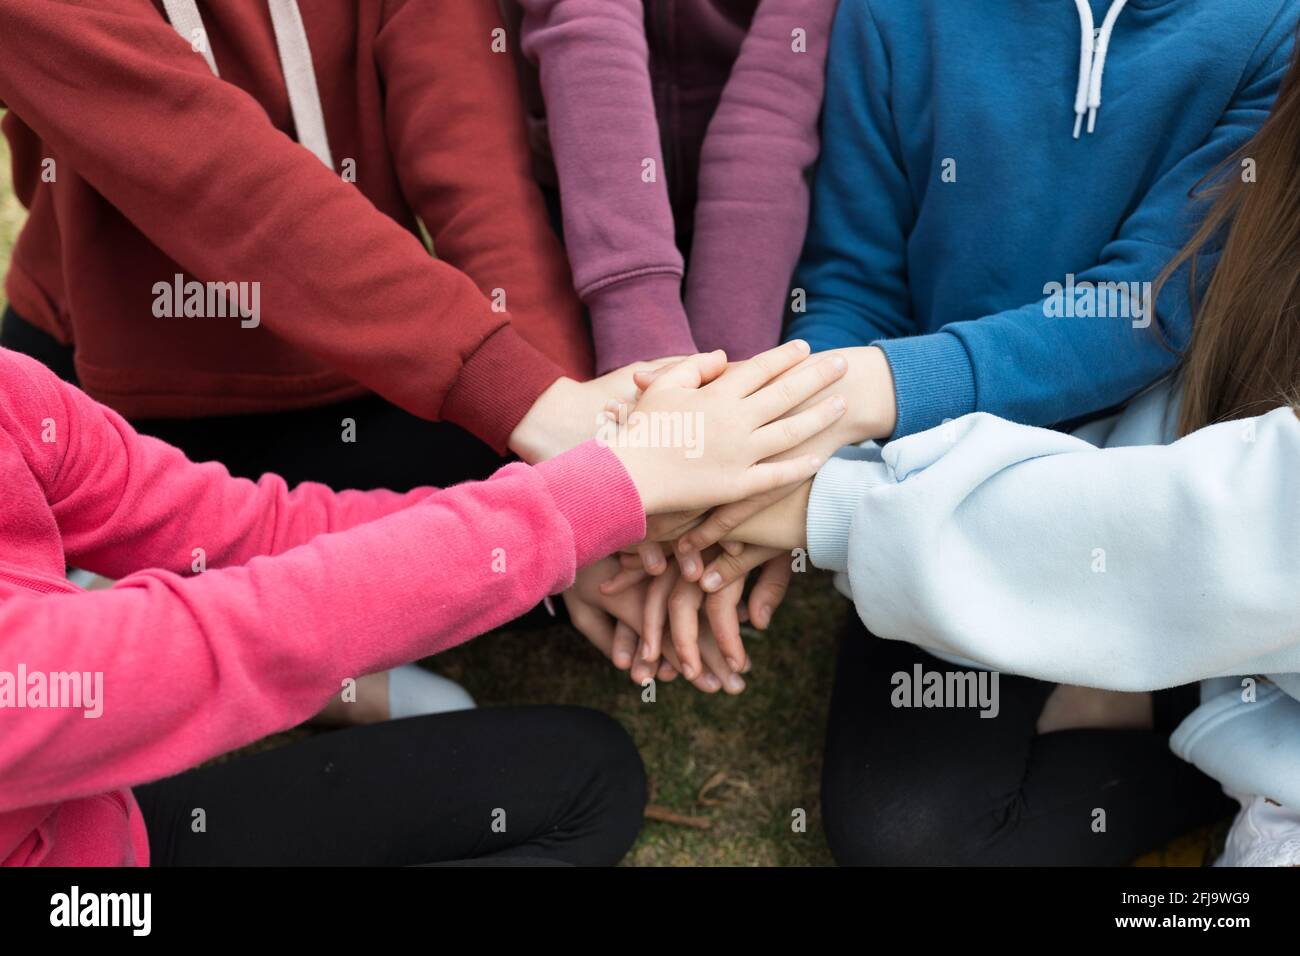 Stack of hands - young girls agreement Stock Photo